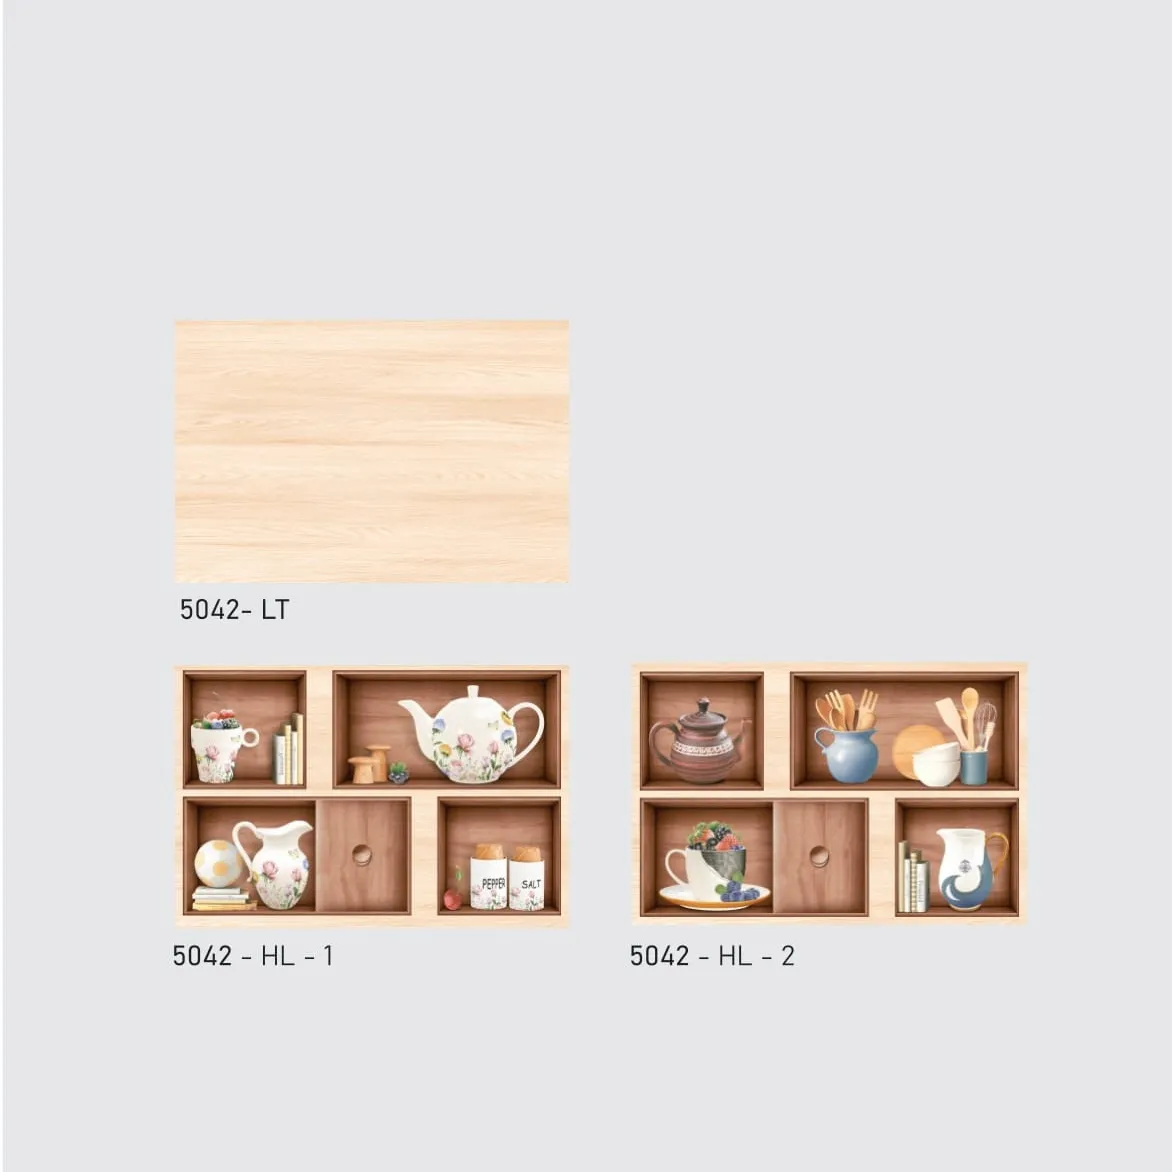 Best quality wide range of design glossy surface Ceramic Digital luxury kitchen wall tile 300x450mm for royal look